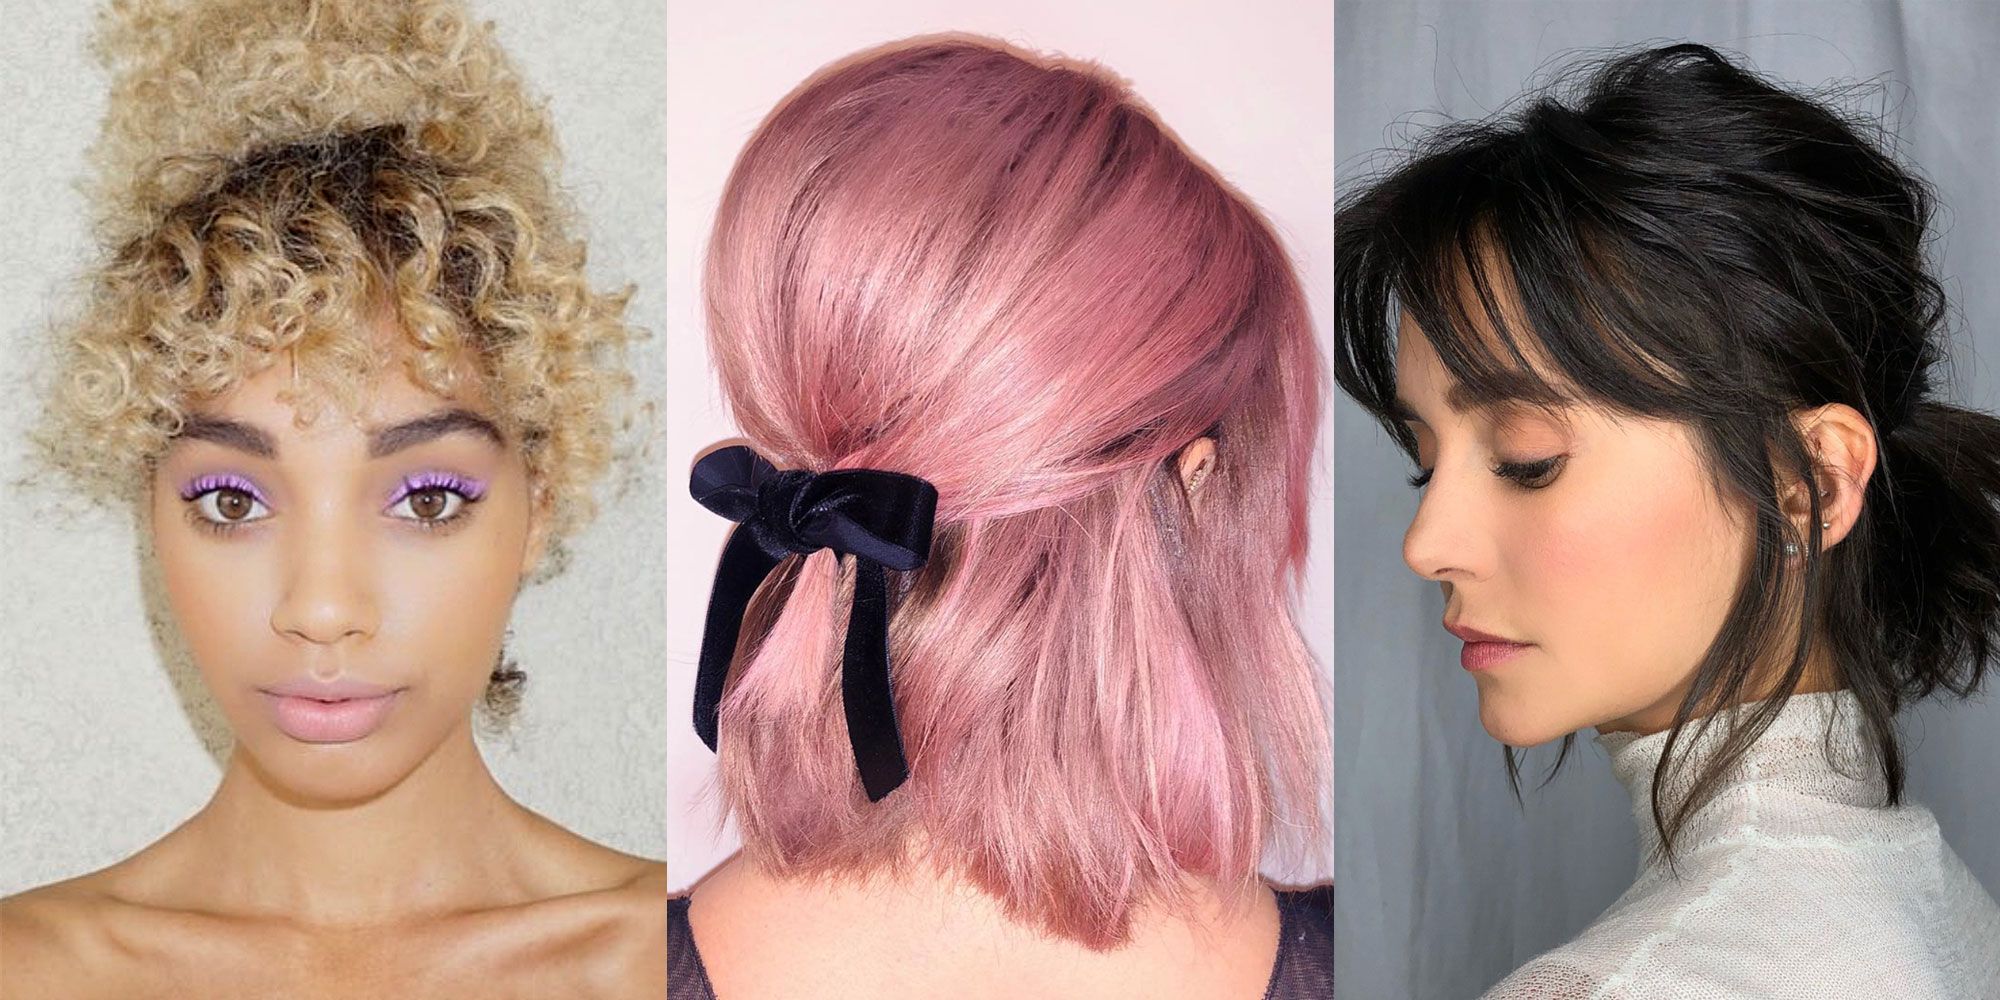 Personality Test: Your Hairstyle Reveals Your True Personality Traits